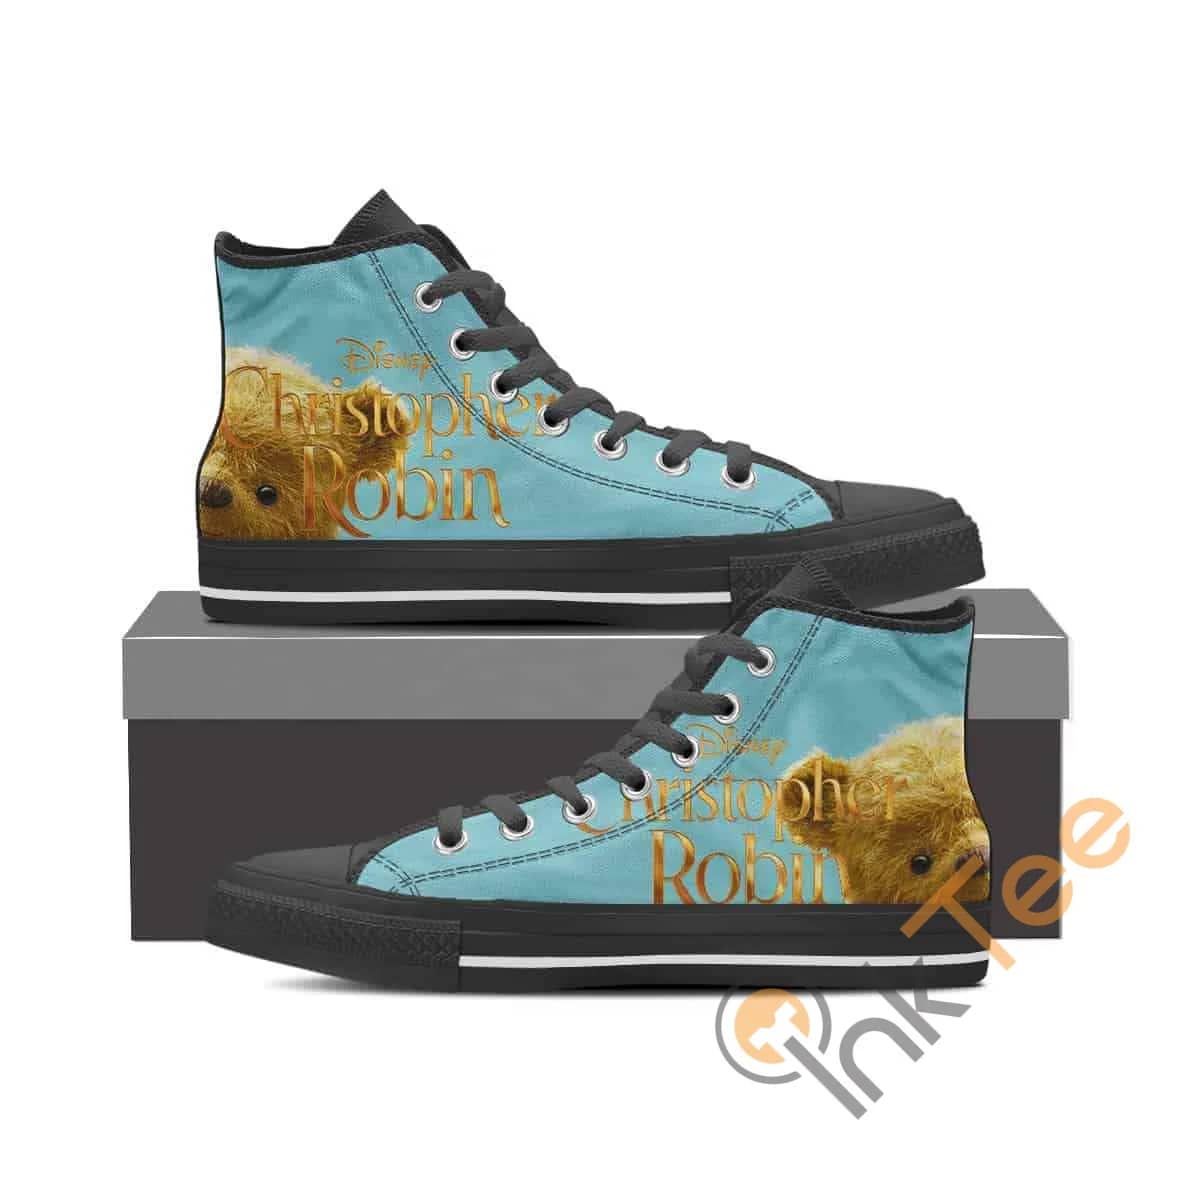 Pooh Christopher Robin Amazon Best Seller Sku 2143 High Top Shoes